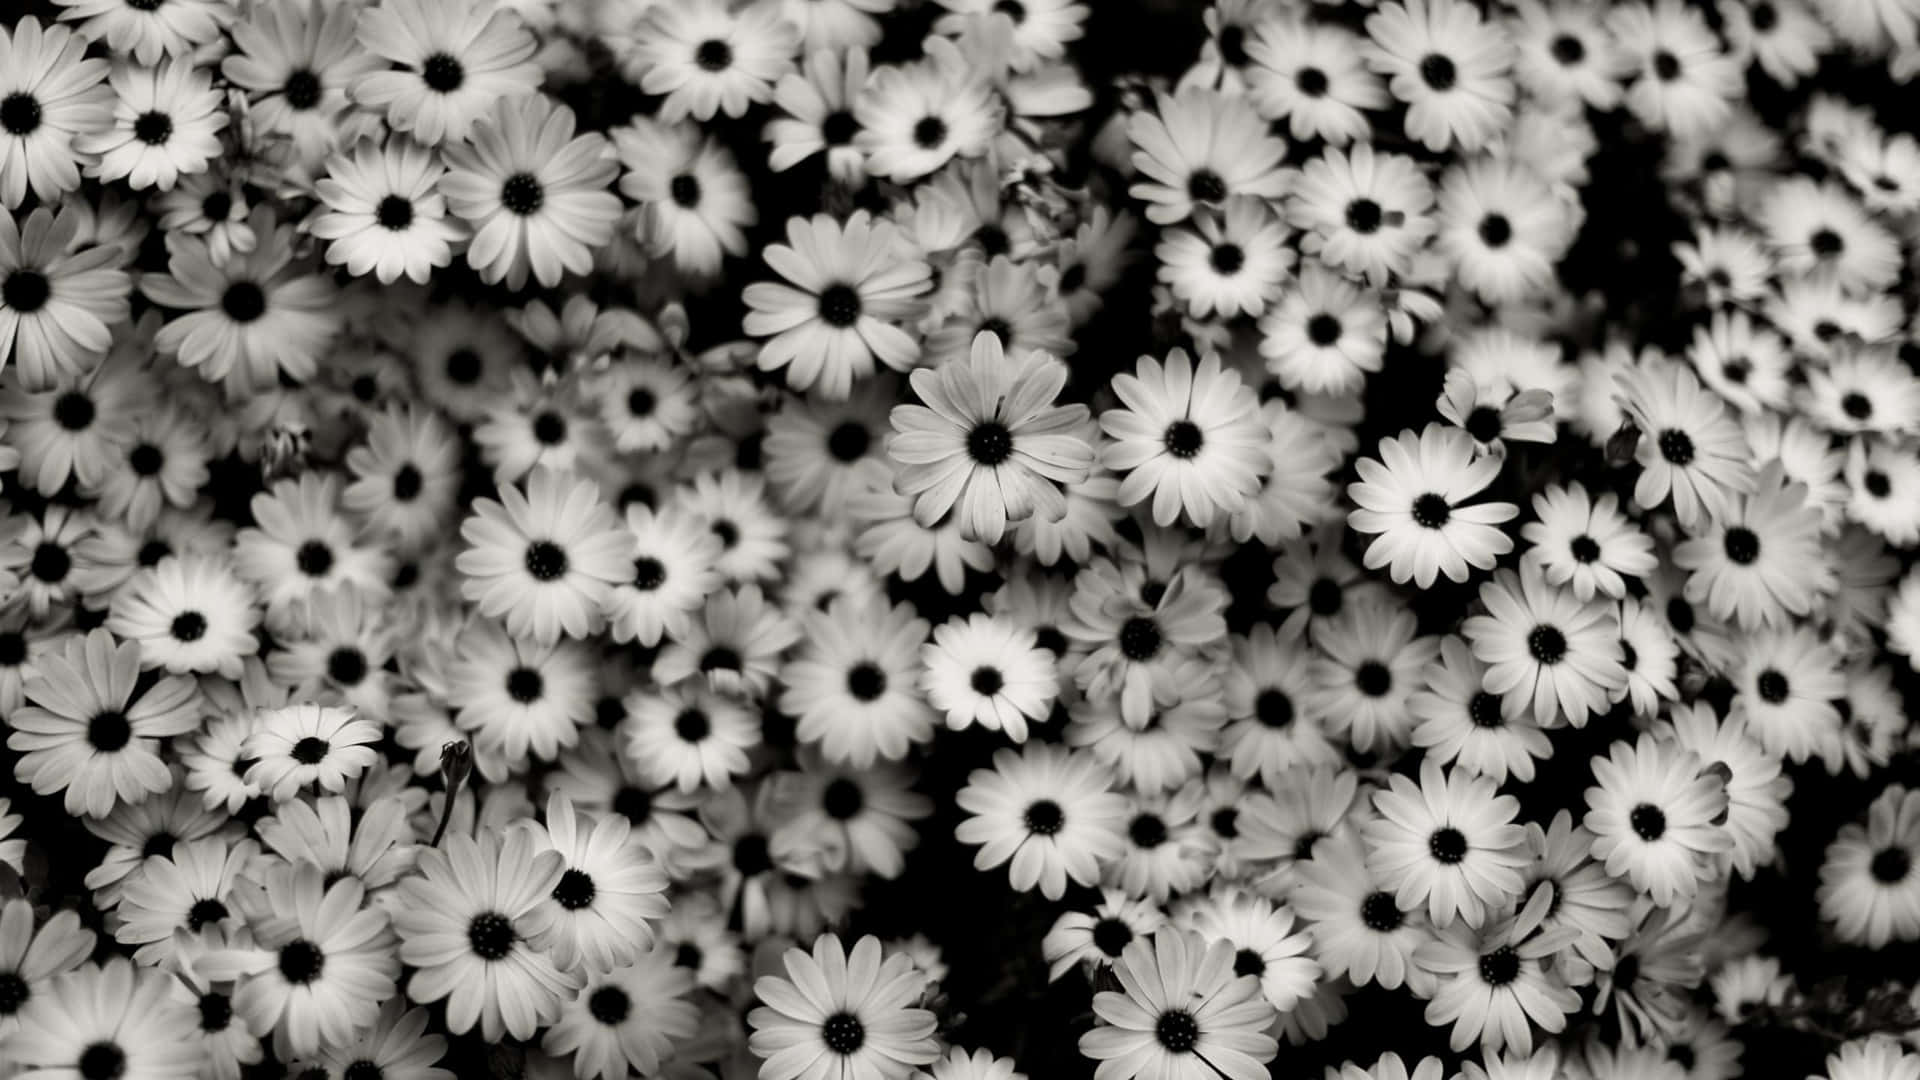 Black And White Photo Of A Bunch Of Flowers Wallpaper